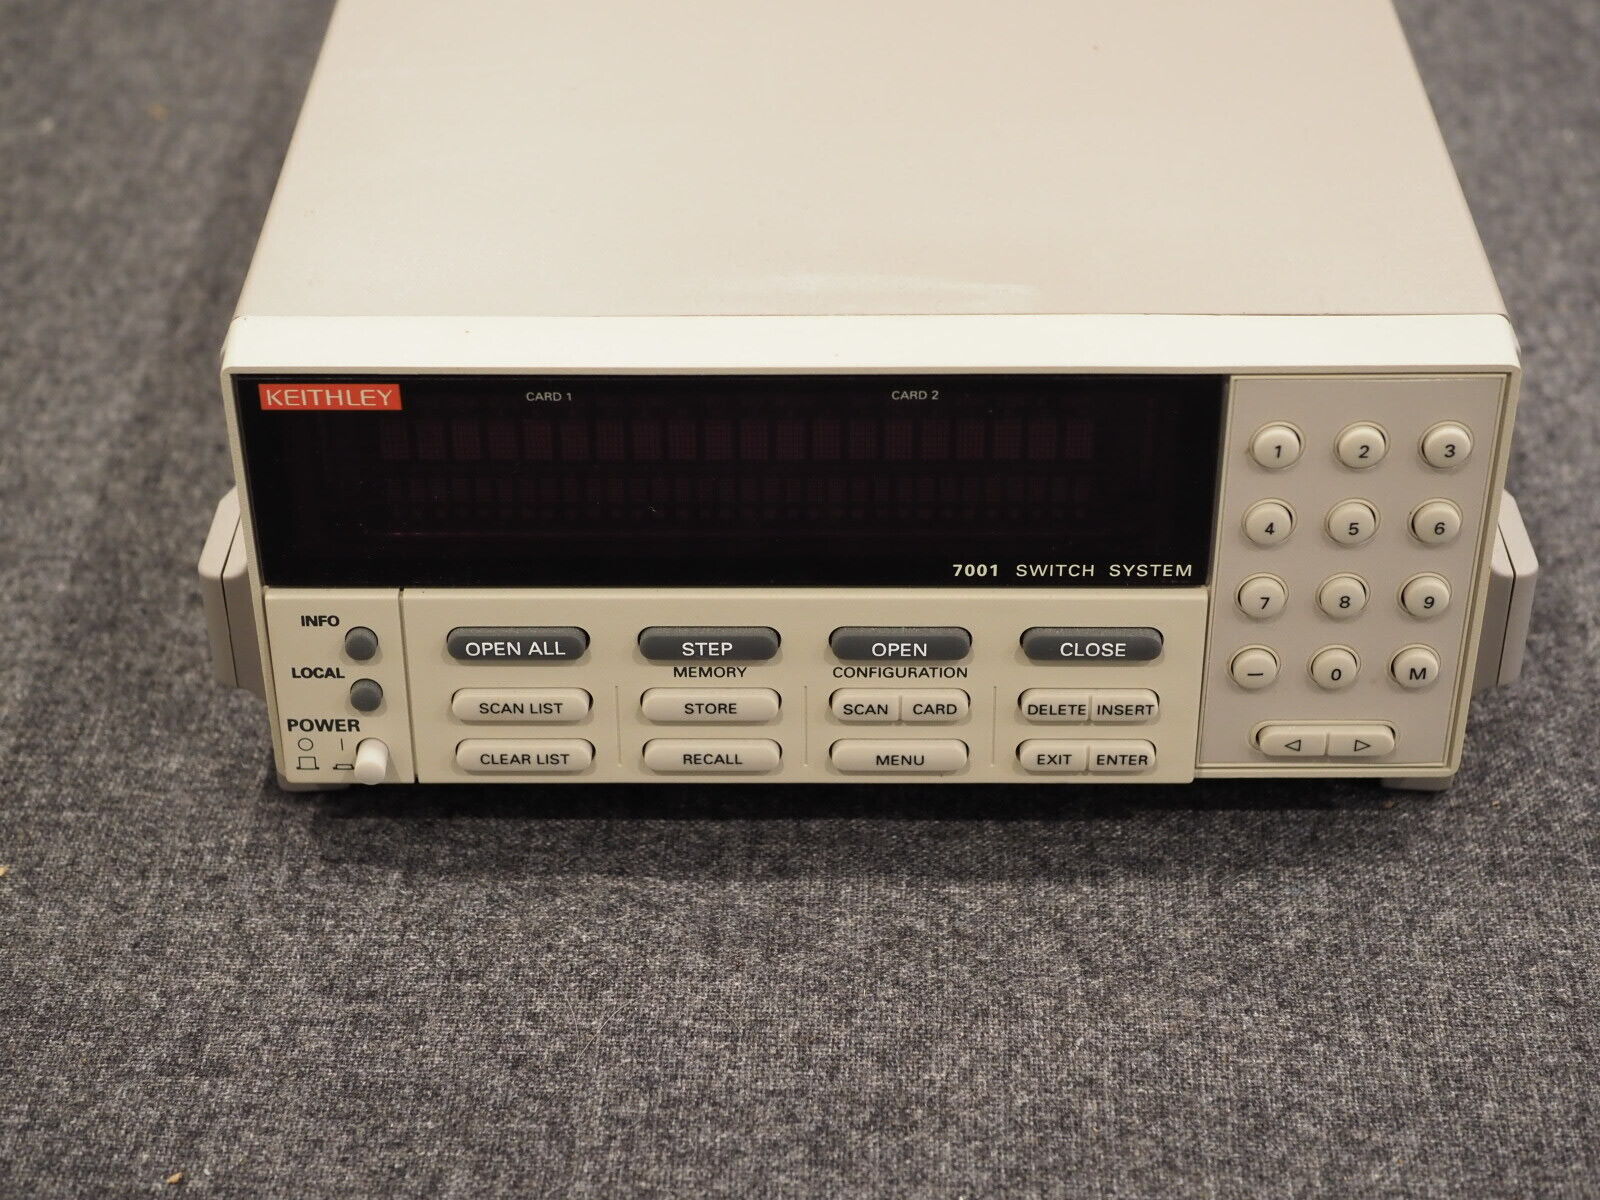 Keithley 7001 Switch System, 7011-S Quad 1x10 Mux and full manual